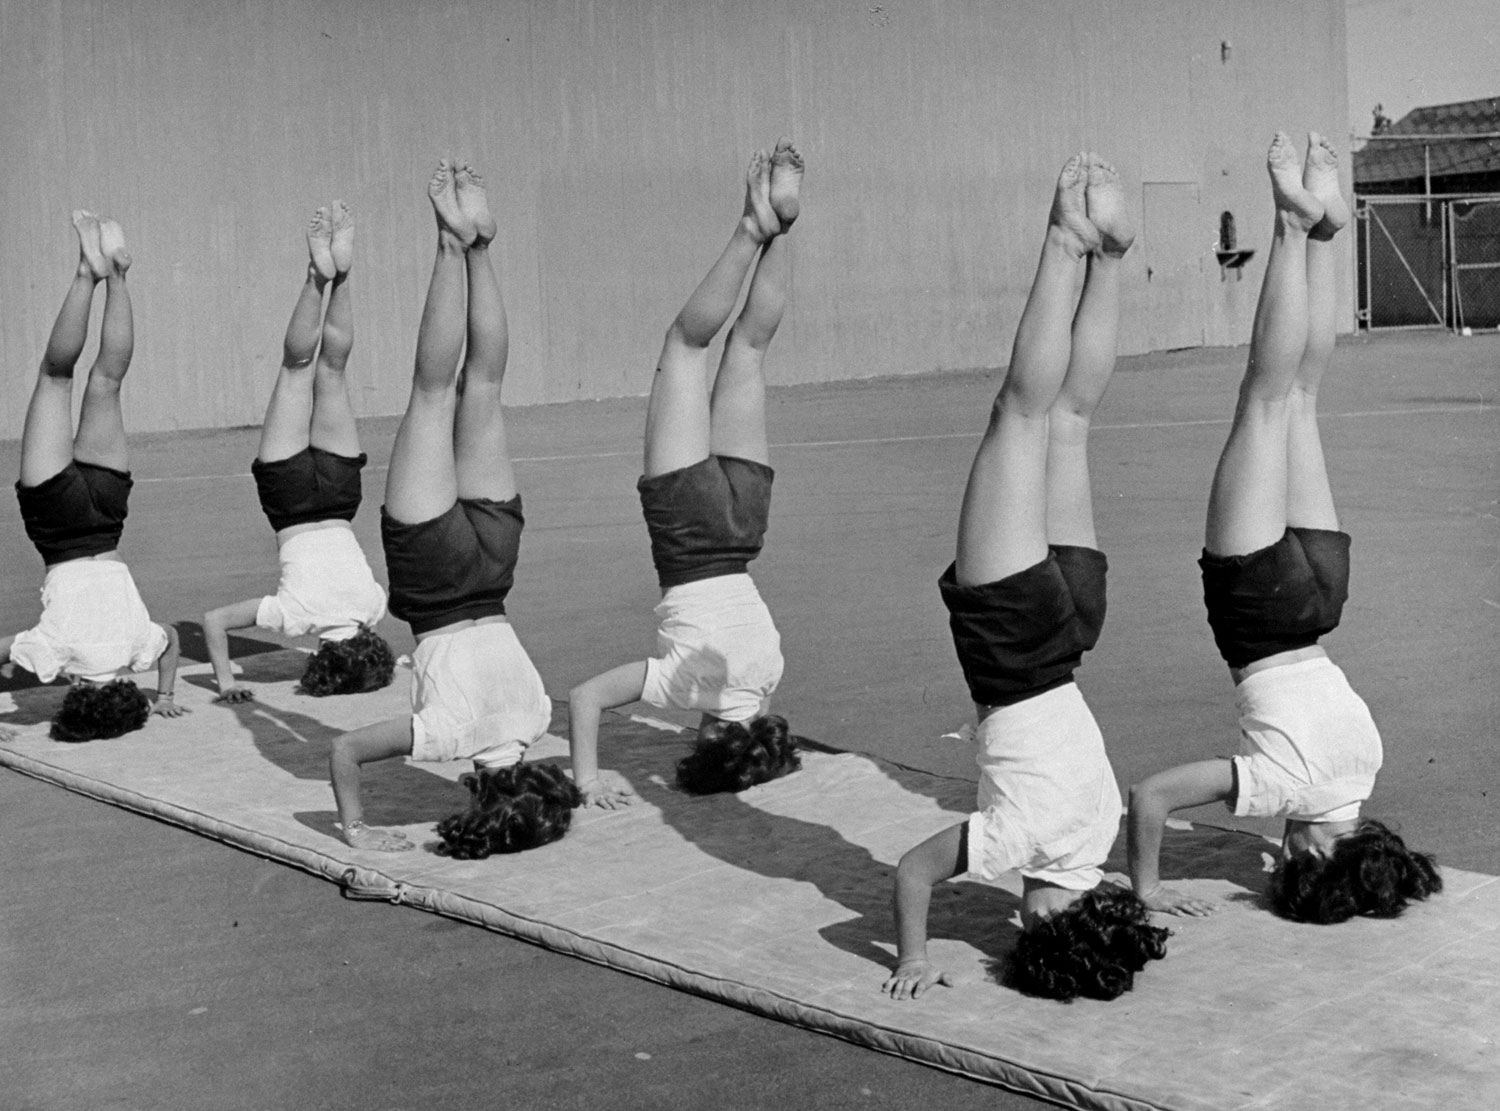 Girls from Hoover High School stand on their heads in gymnastics class, San Diego, Calif., 1946.